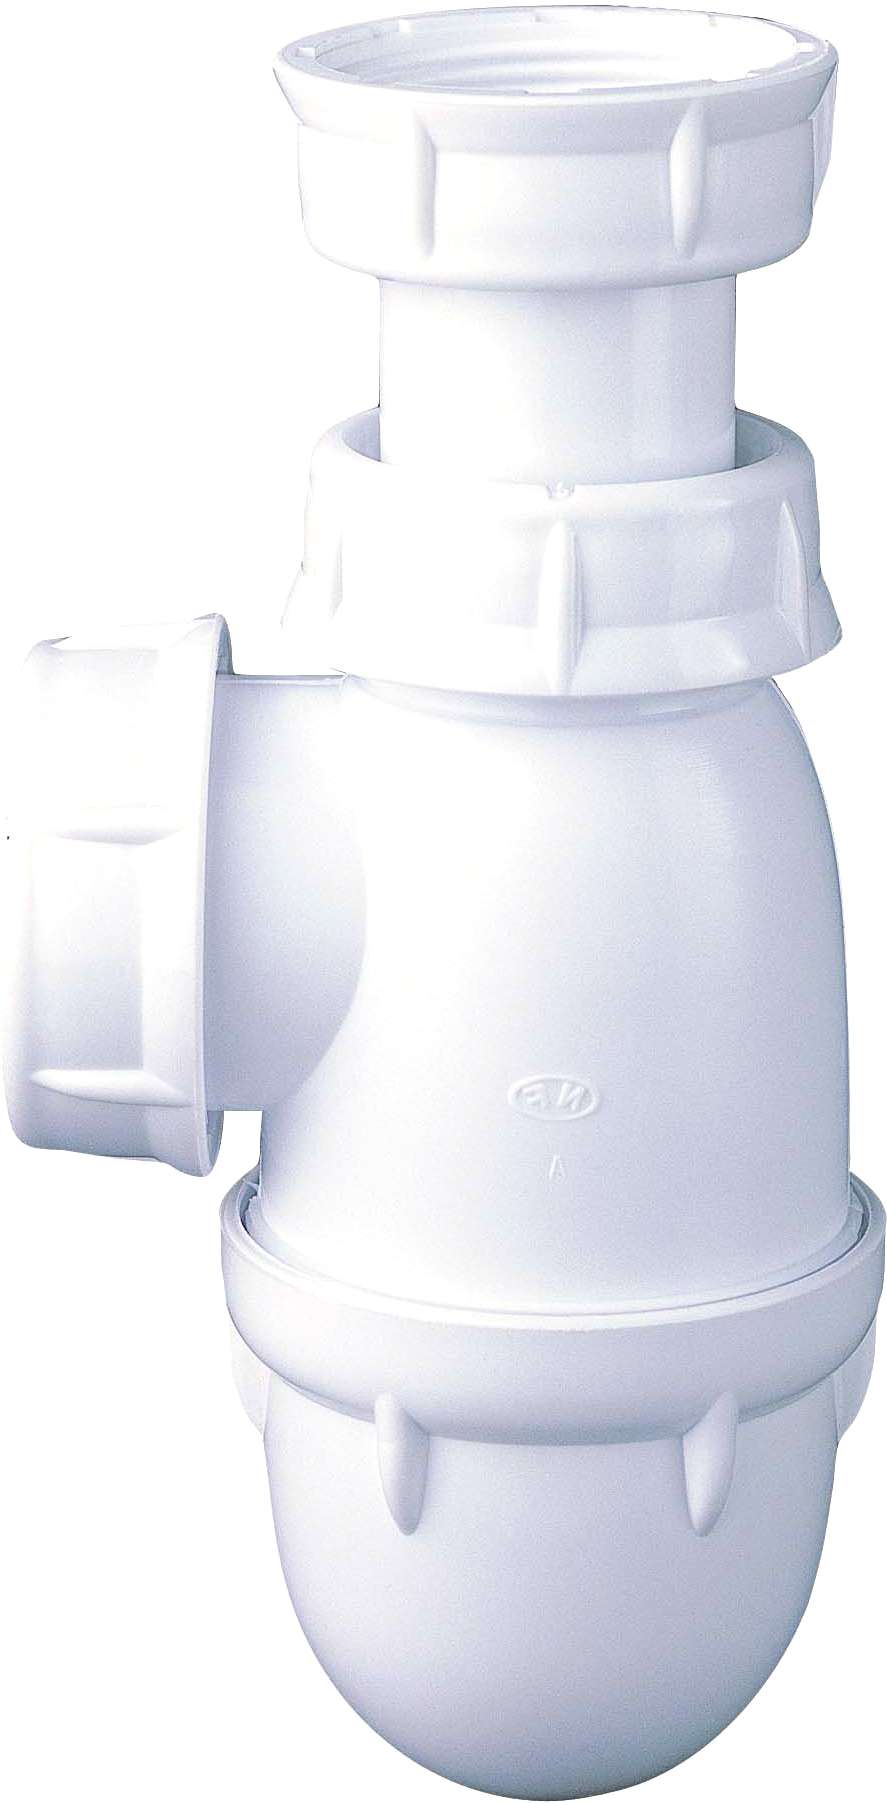 Adjustable washbasin trap with removable cap - 0201001